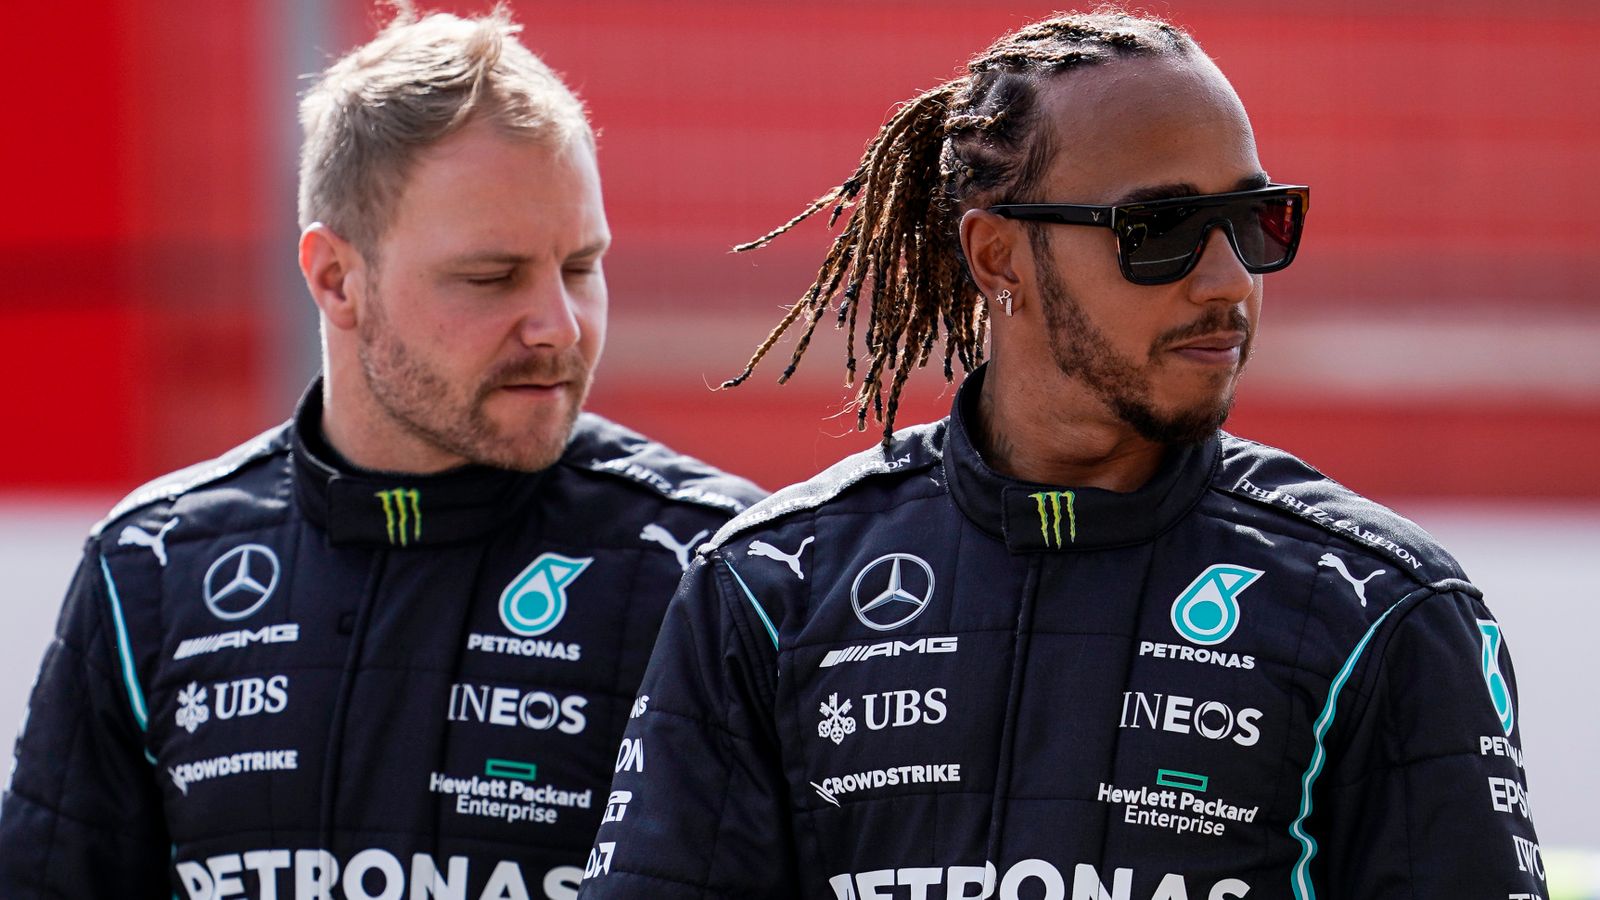 Lewis Hamilton says Mercedes has ‘a lot of work to do’ for Bahrain GP but ready to tackle Red Bull challenge